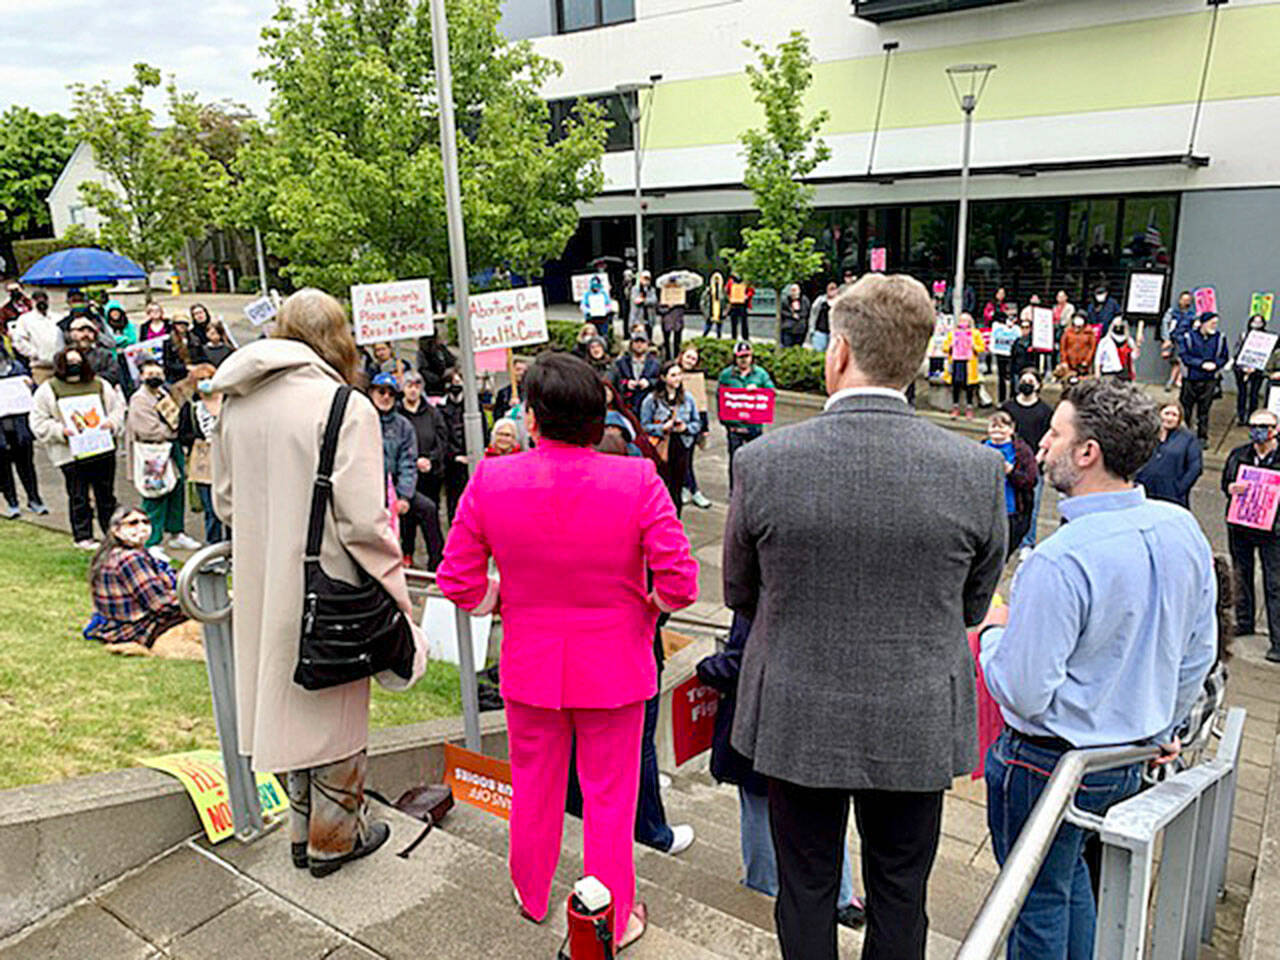 A crowd of about 100 people attends a reproductive rights rally on Friday in front of the Norm Dicks Government Building in Bremerton. (Bob Smith | Kitsap News Group)